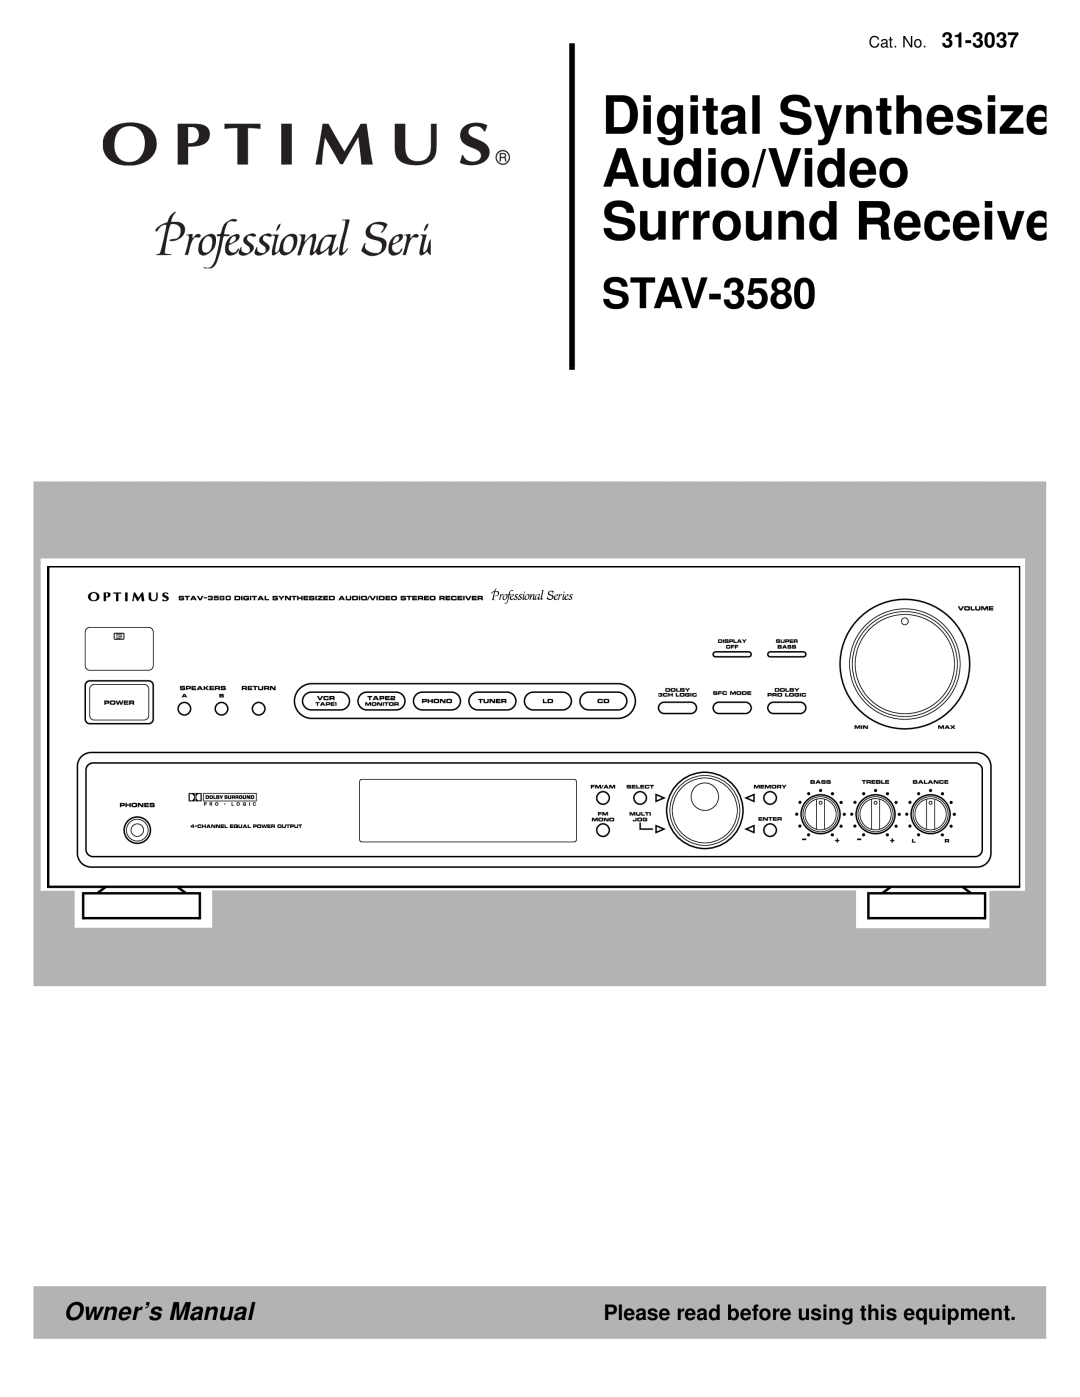 Optimus STAV-3580 owner manual Digital Synthesize Audio/Video Surround Receive, Please read before using this equipment 